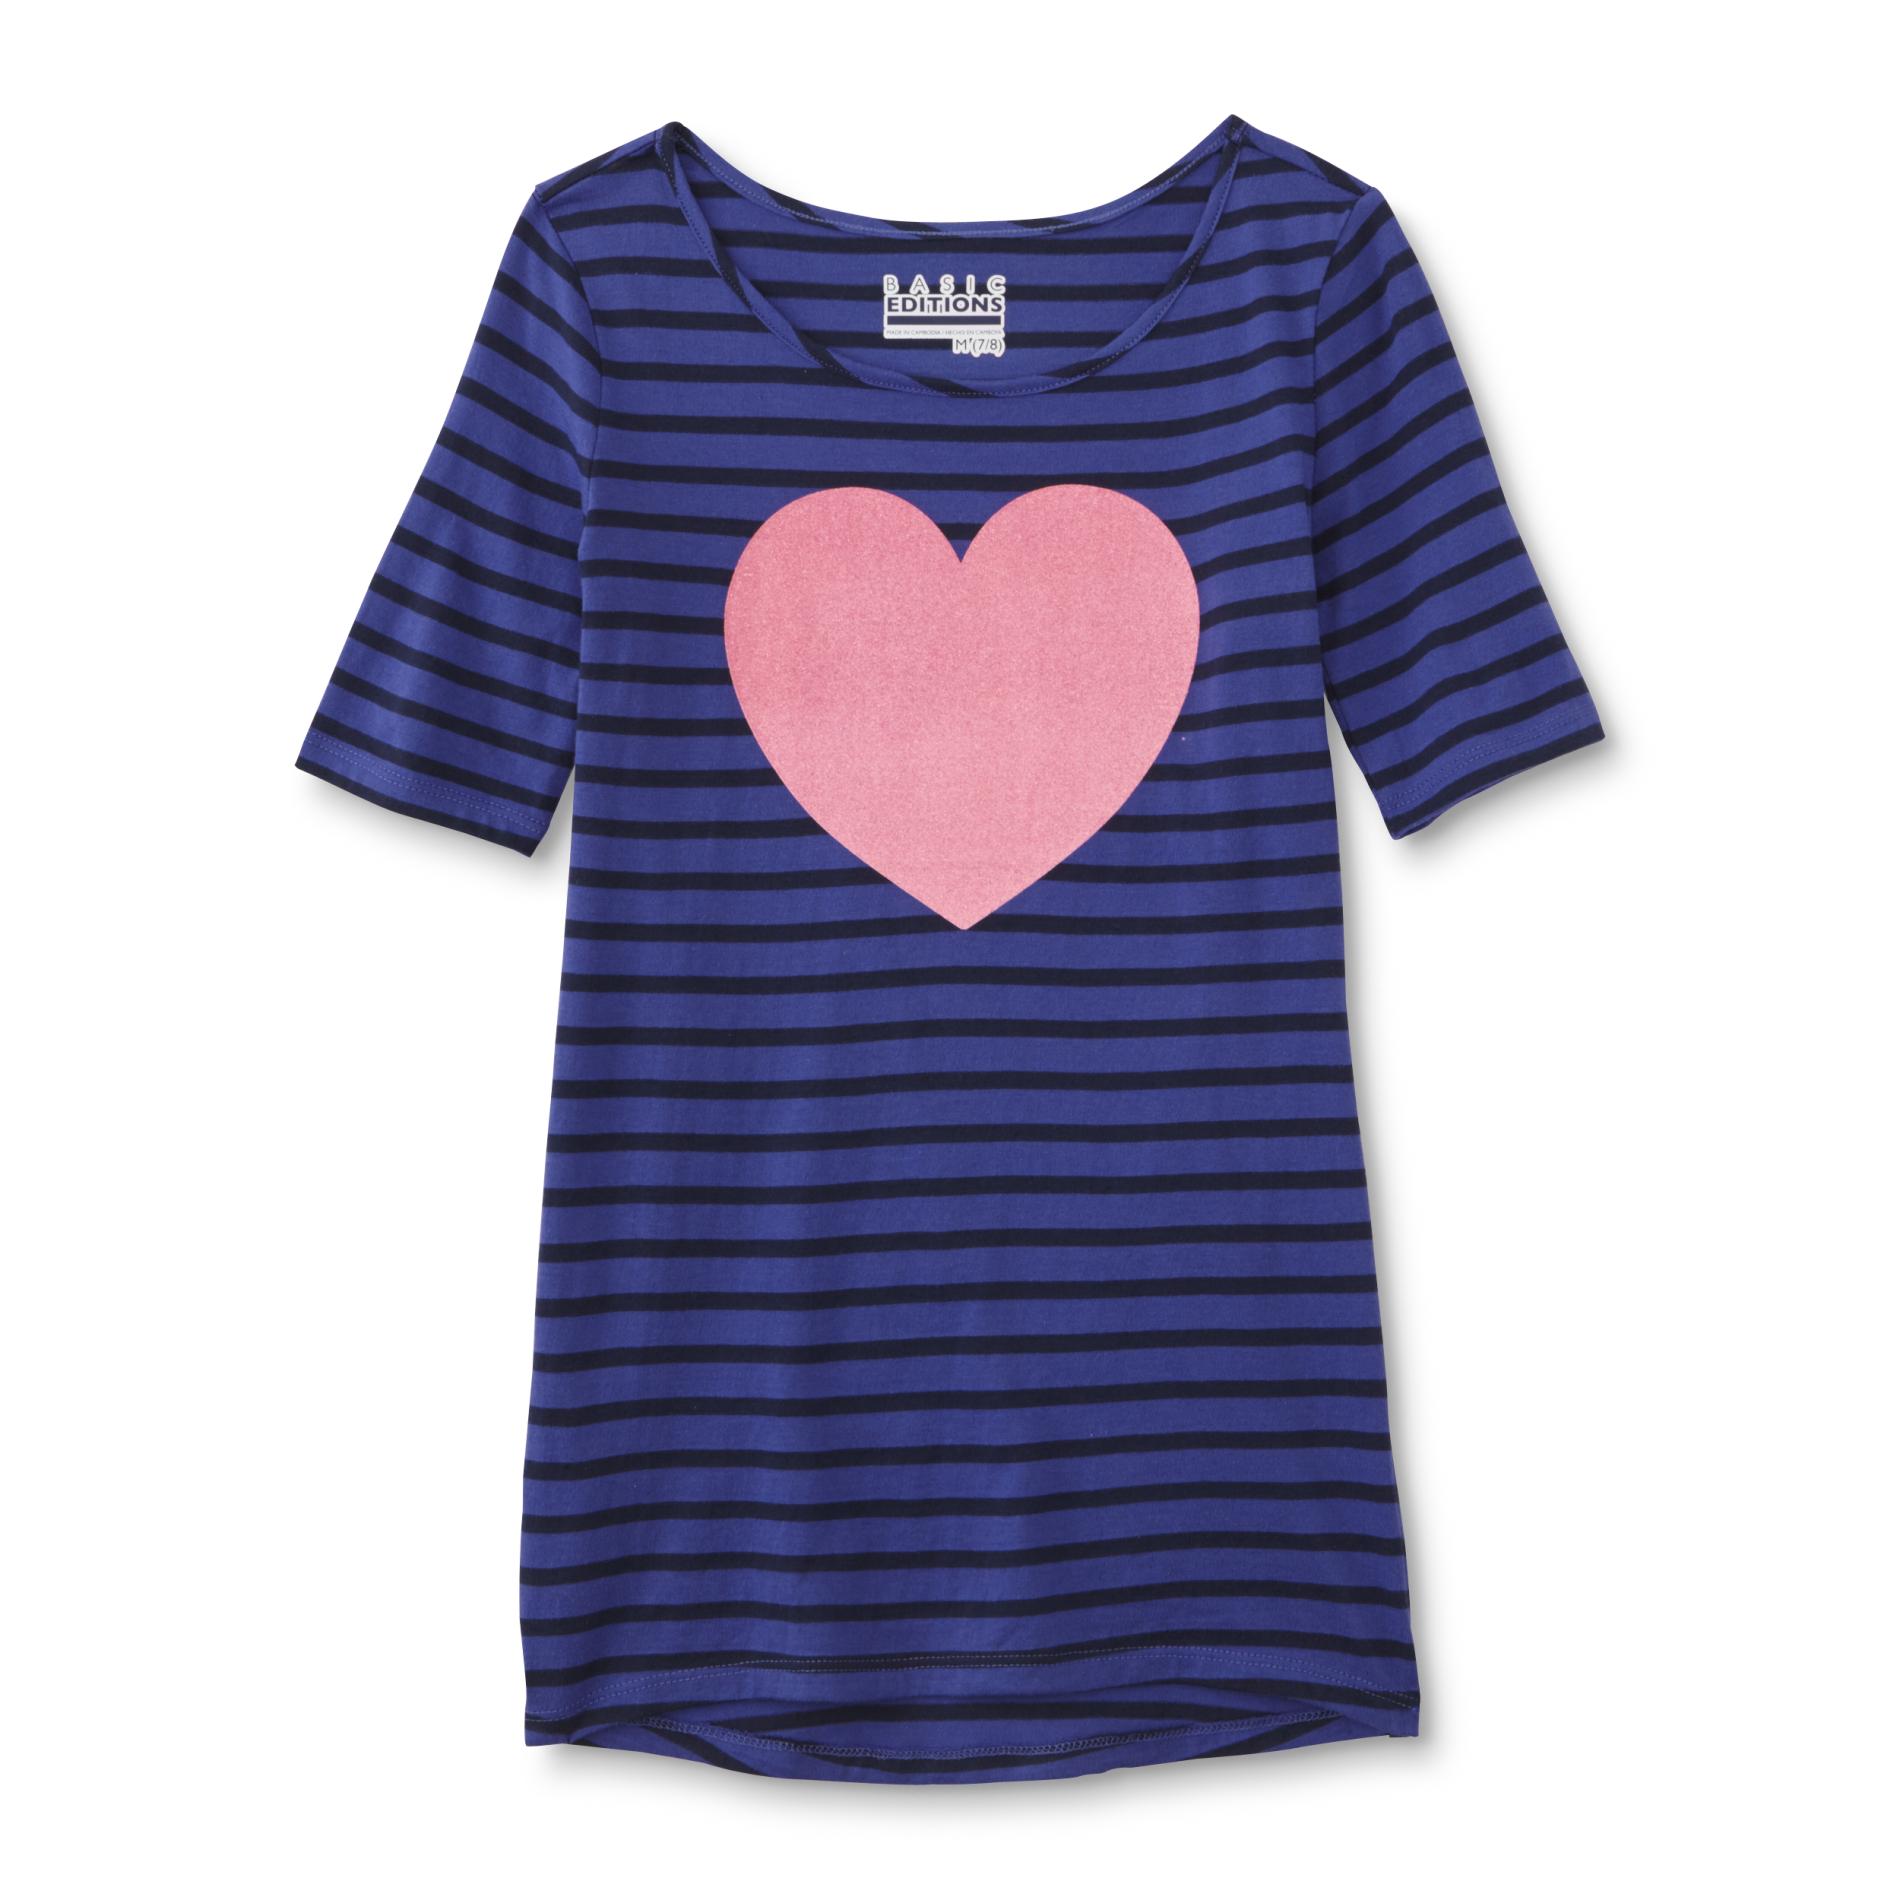 Basic Editions Girl's Graphic Tunic - Heart & Striped